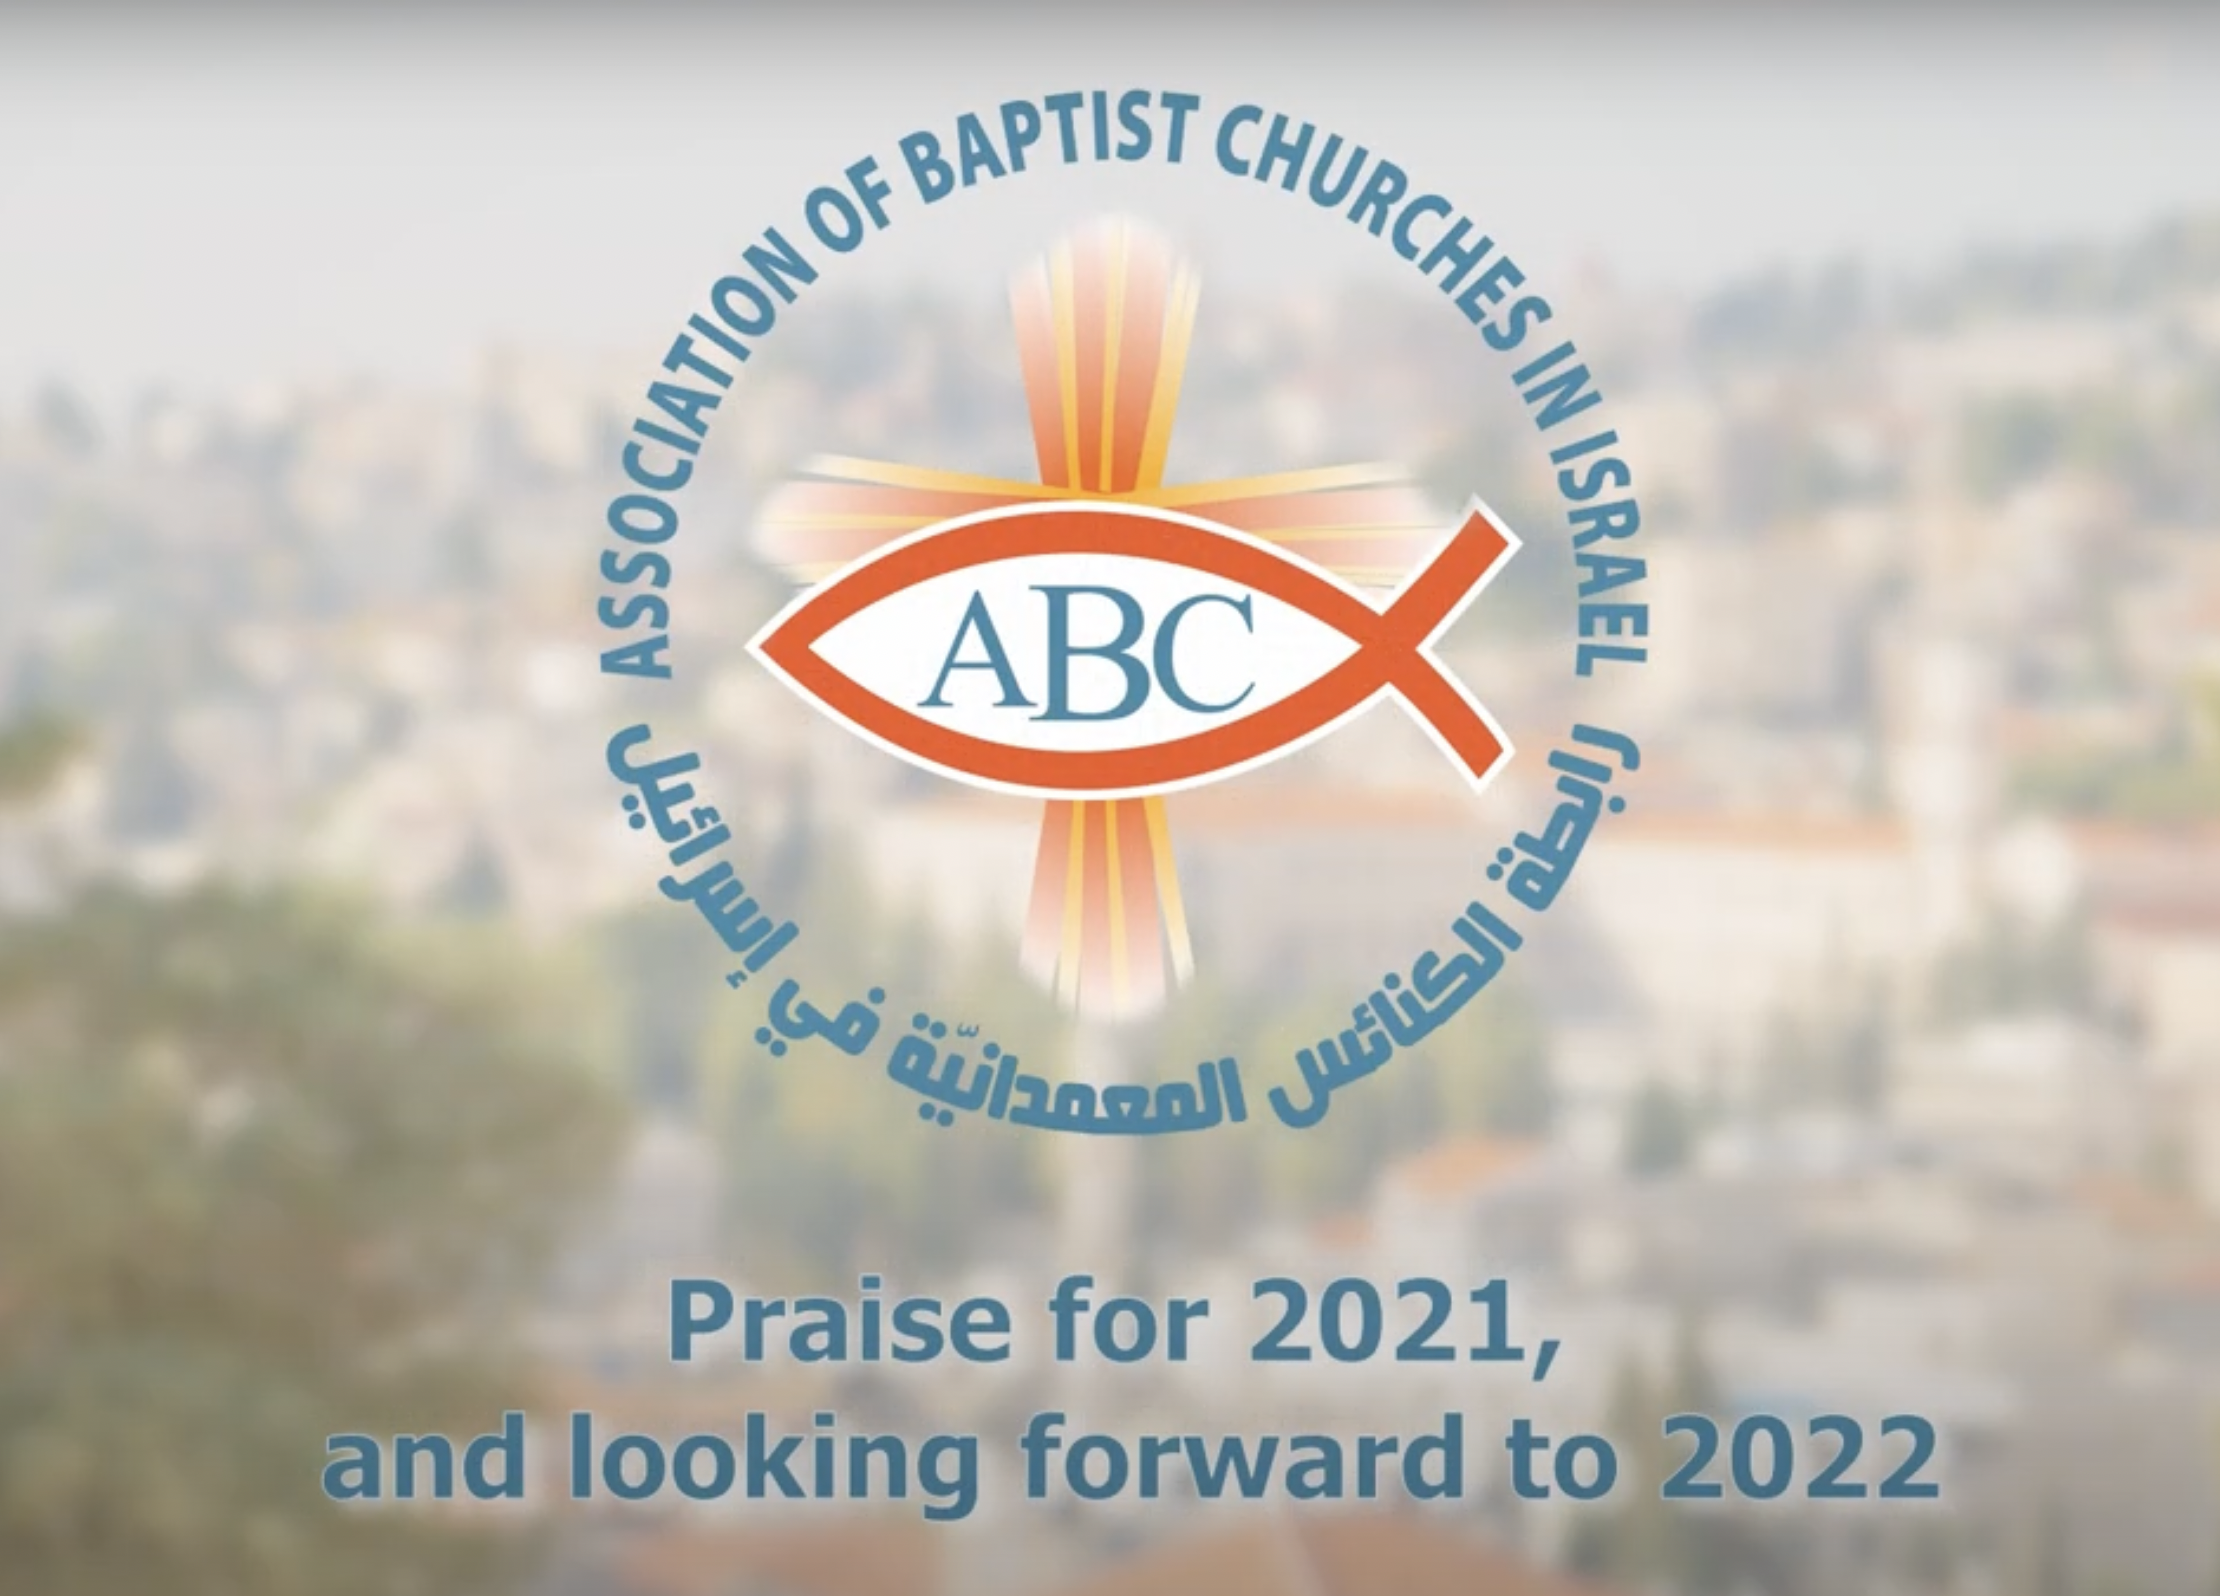 logo of the association of baptist churches, praise for 2021, and looking forward to 2022